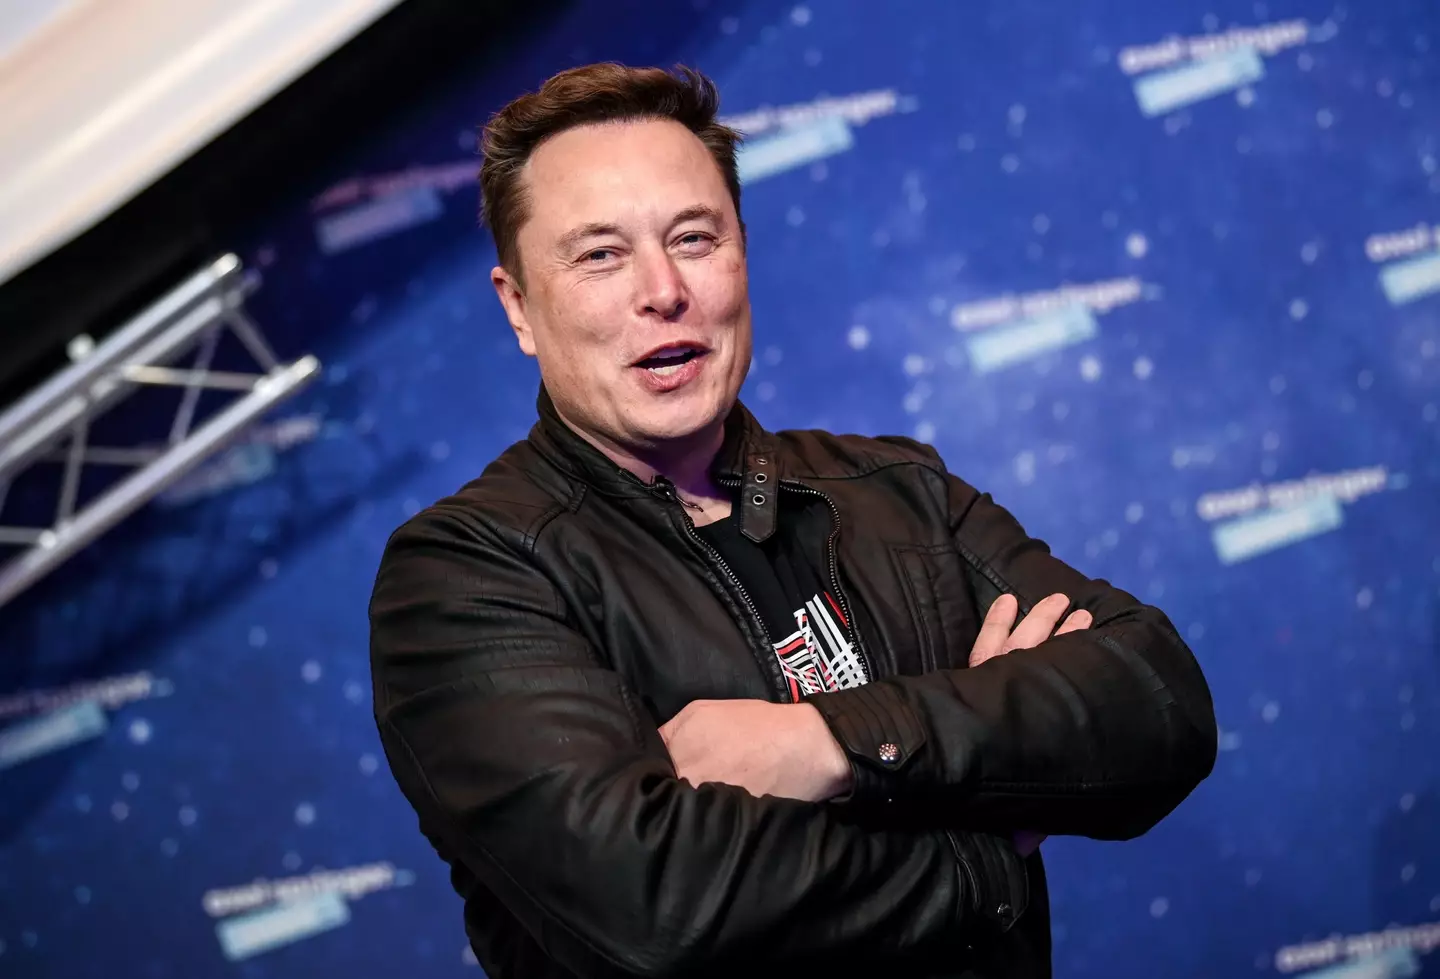 Musk recently reached an agreement to buy Twitter for $44 billion.